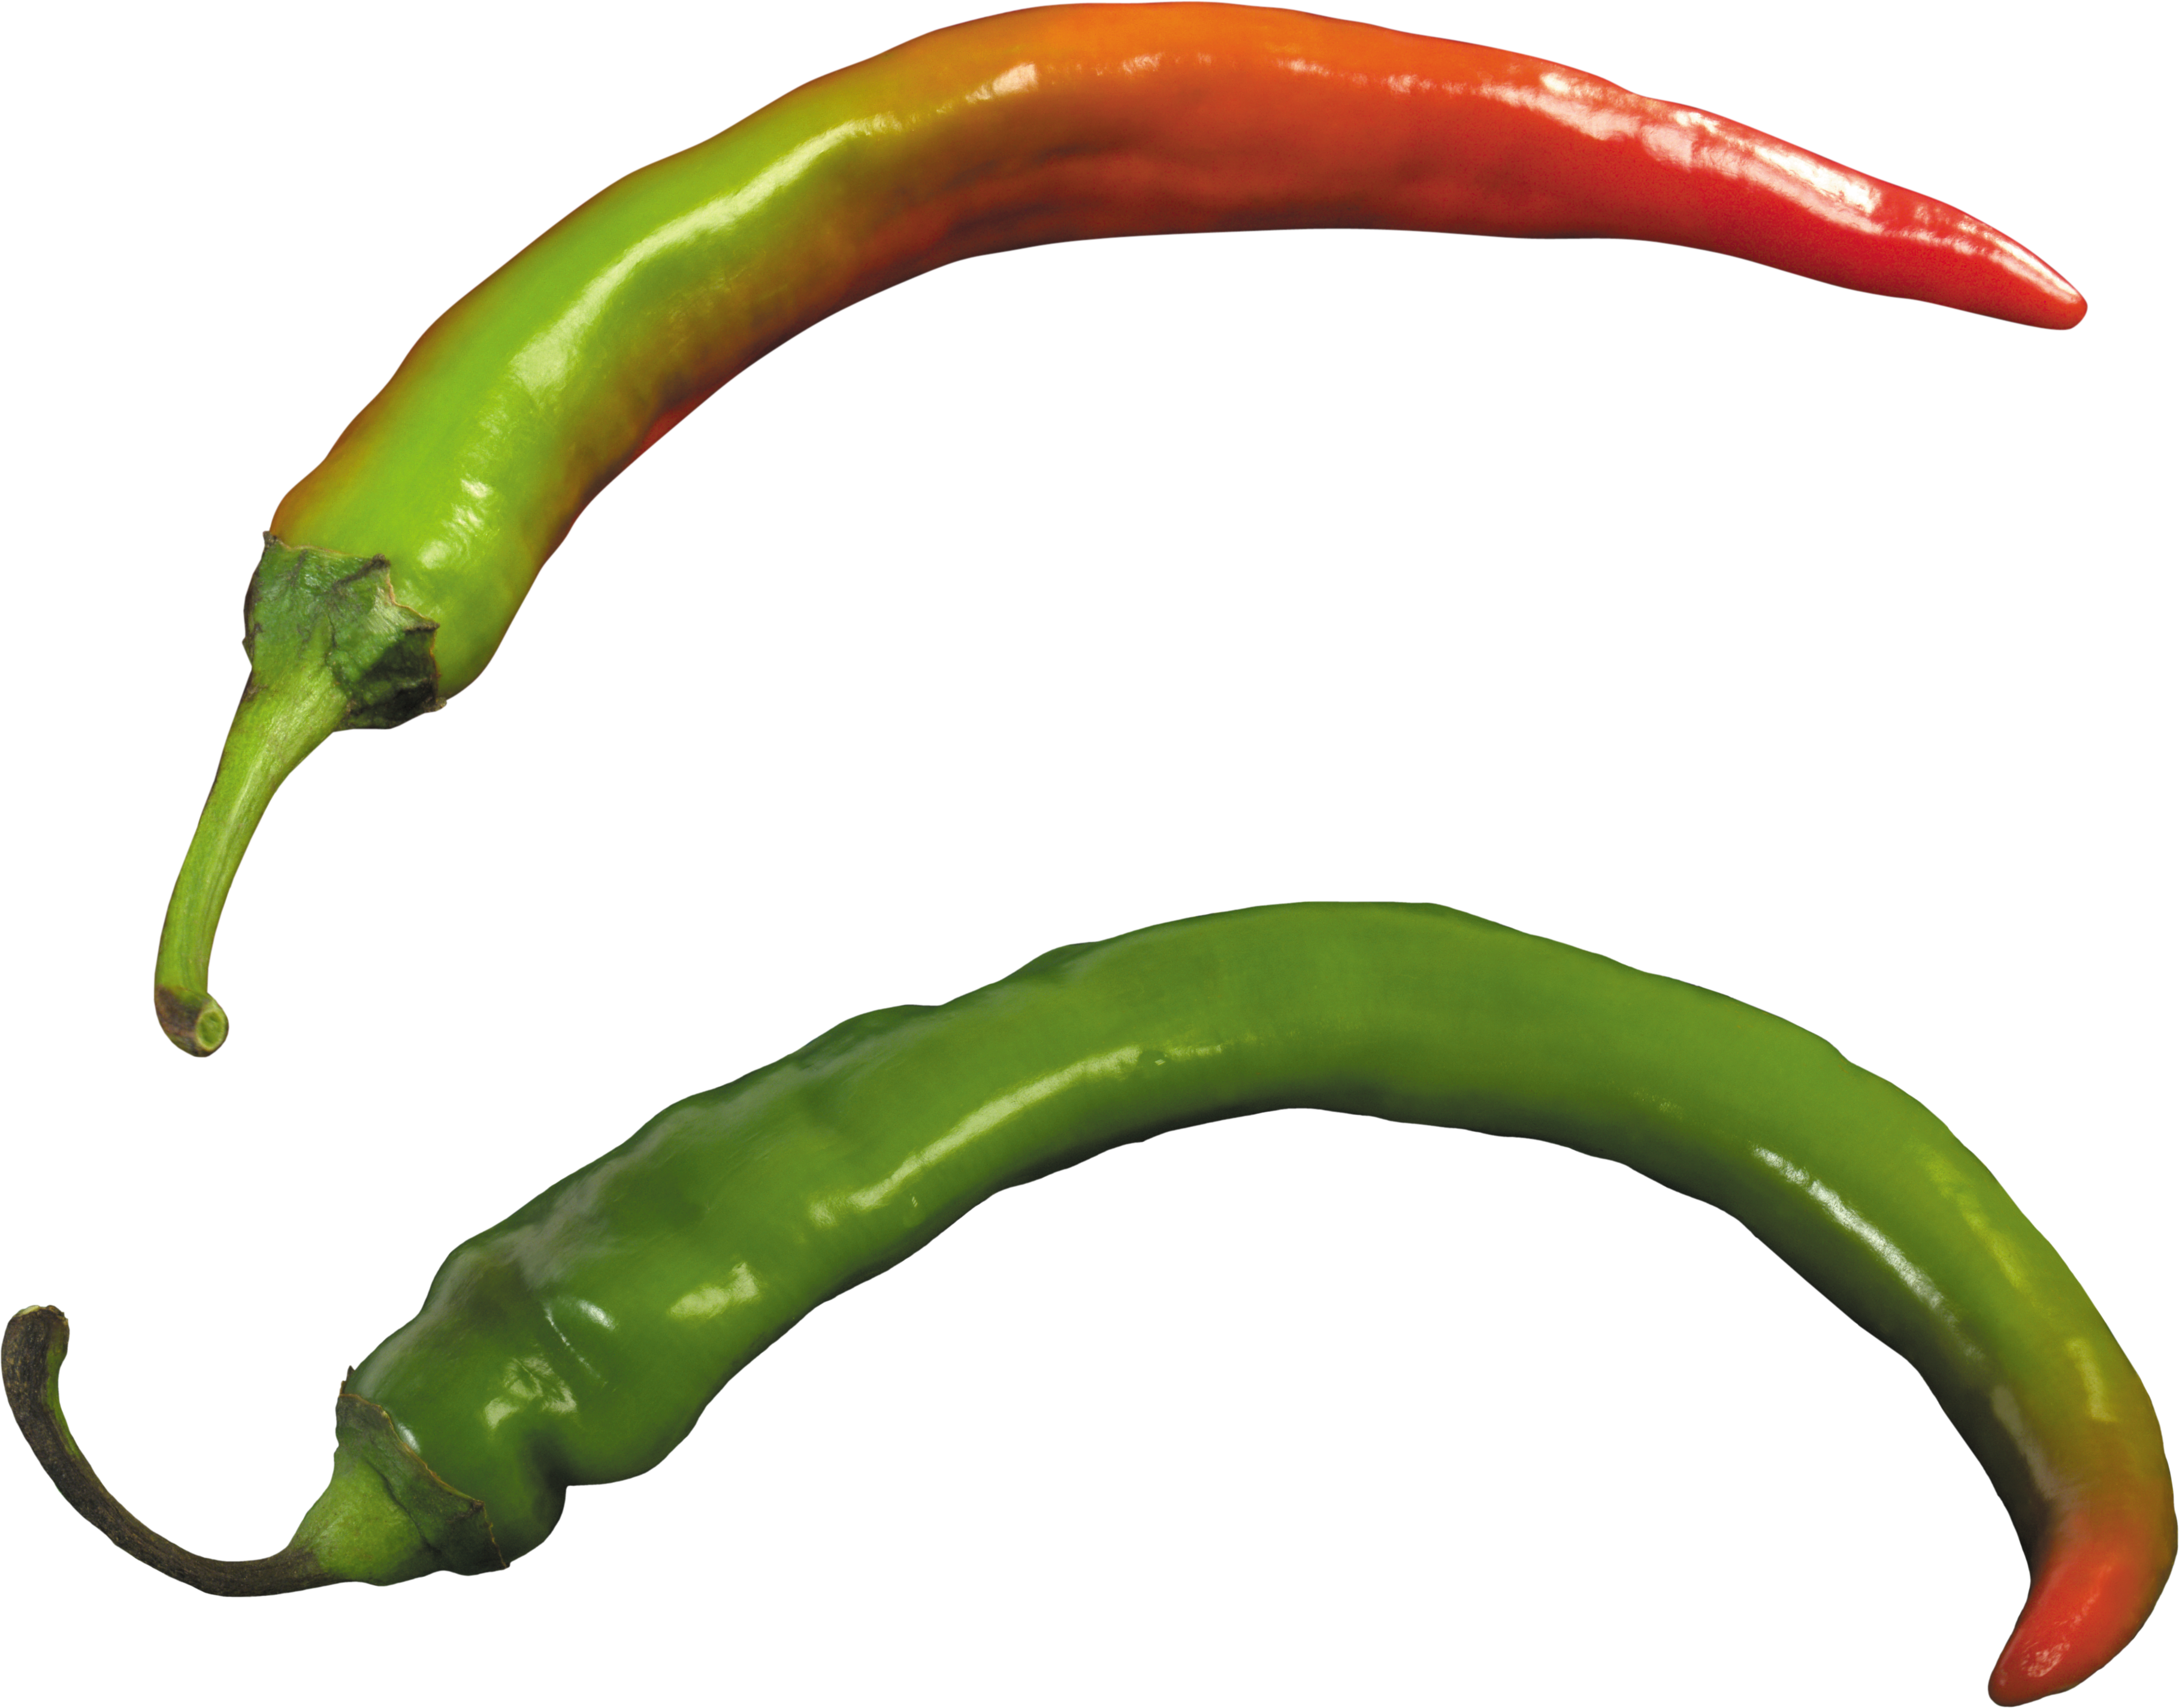 Png image free download. Pepper clipart spicy pepper